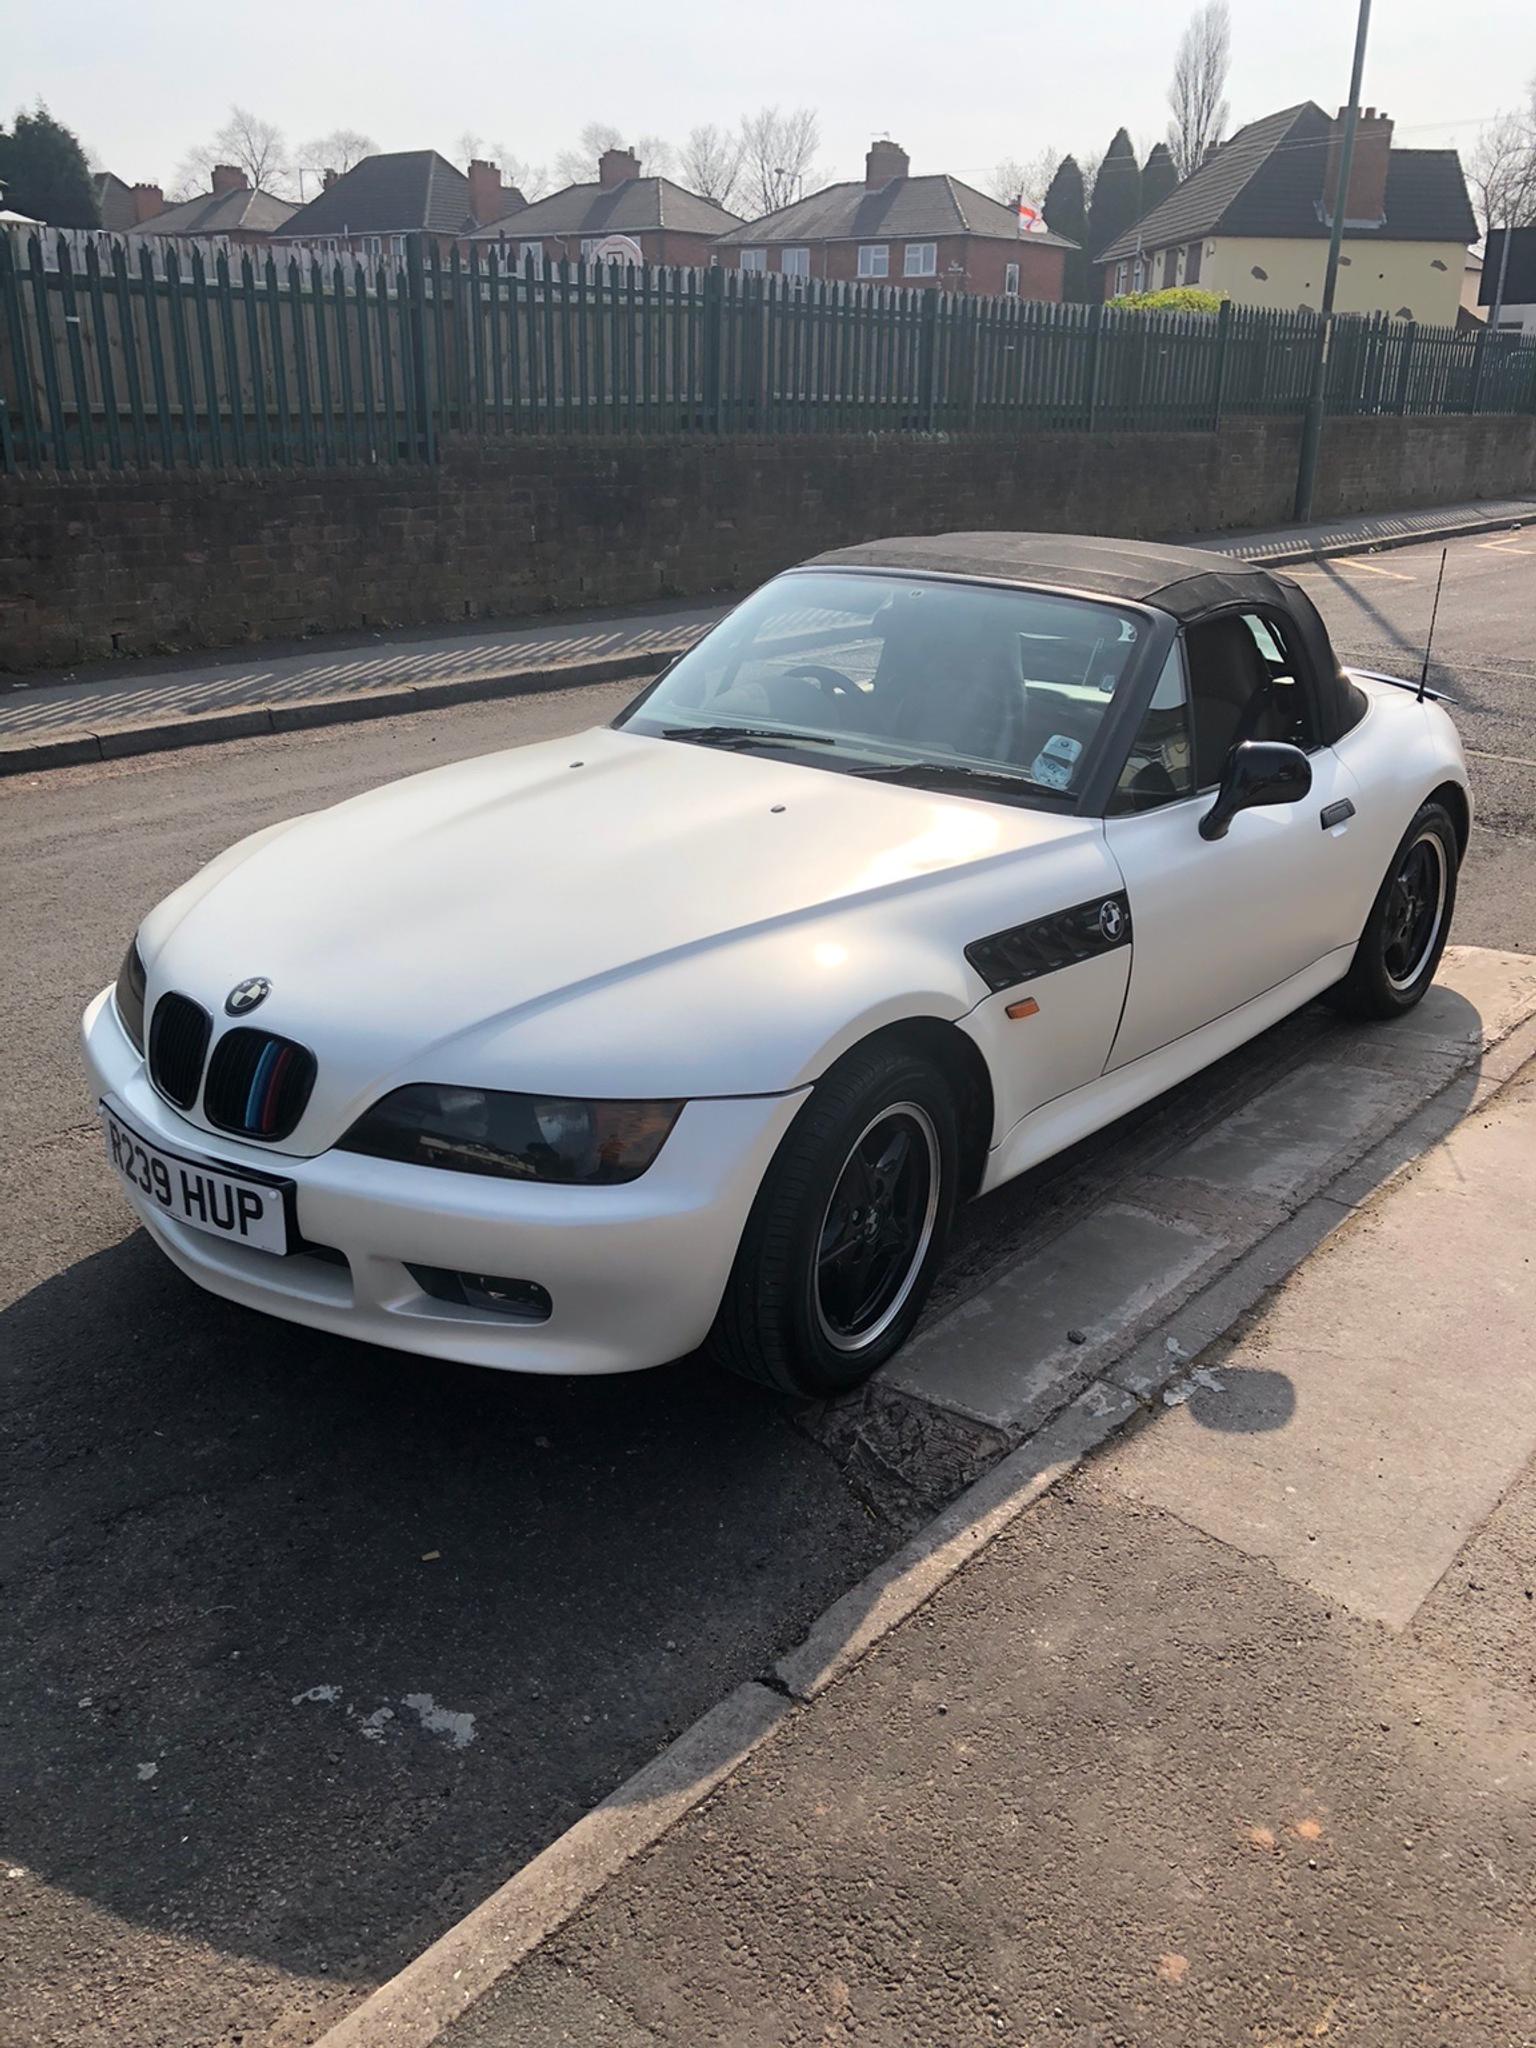 BMW z3 roadster in Walsall for £1,995.00 for sale | Shpock